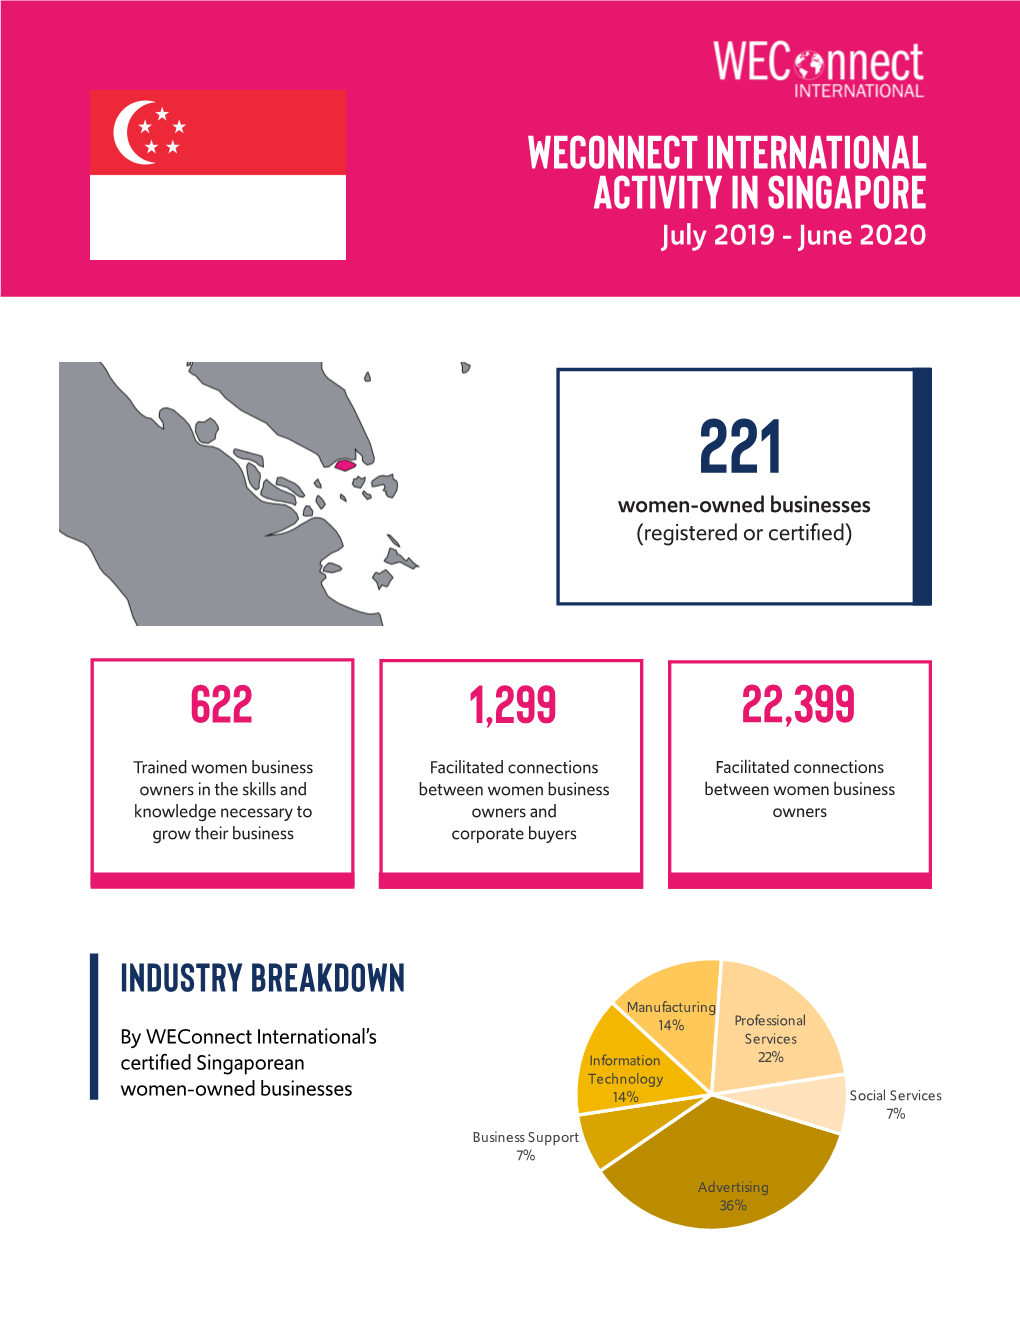 WECONNECT INTERNATIONAL ACTIVITY in Singapore July 2019 - June 2020